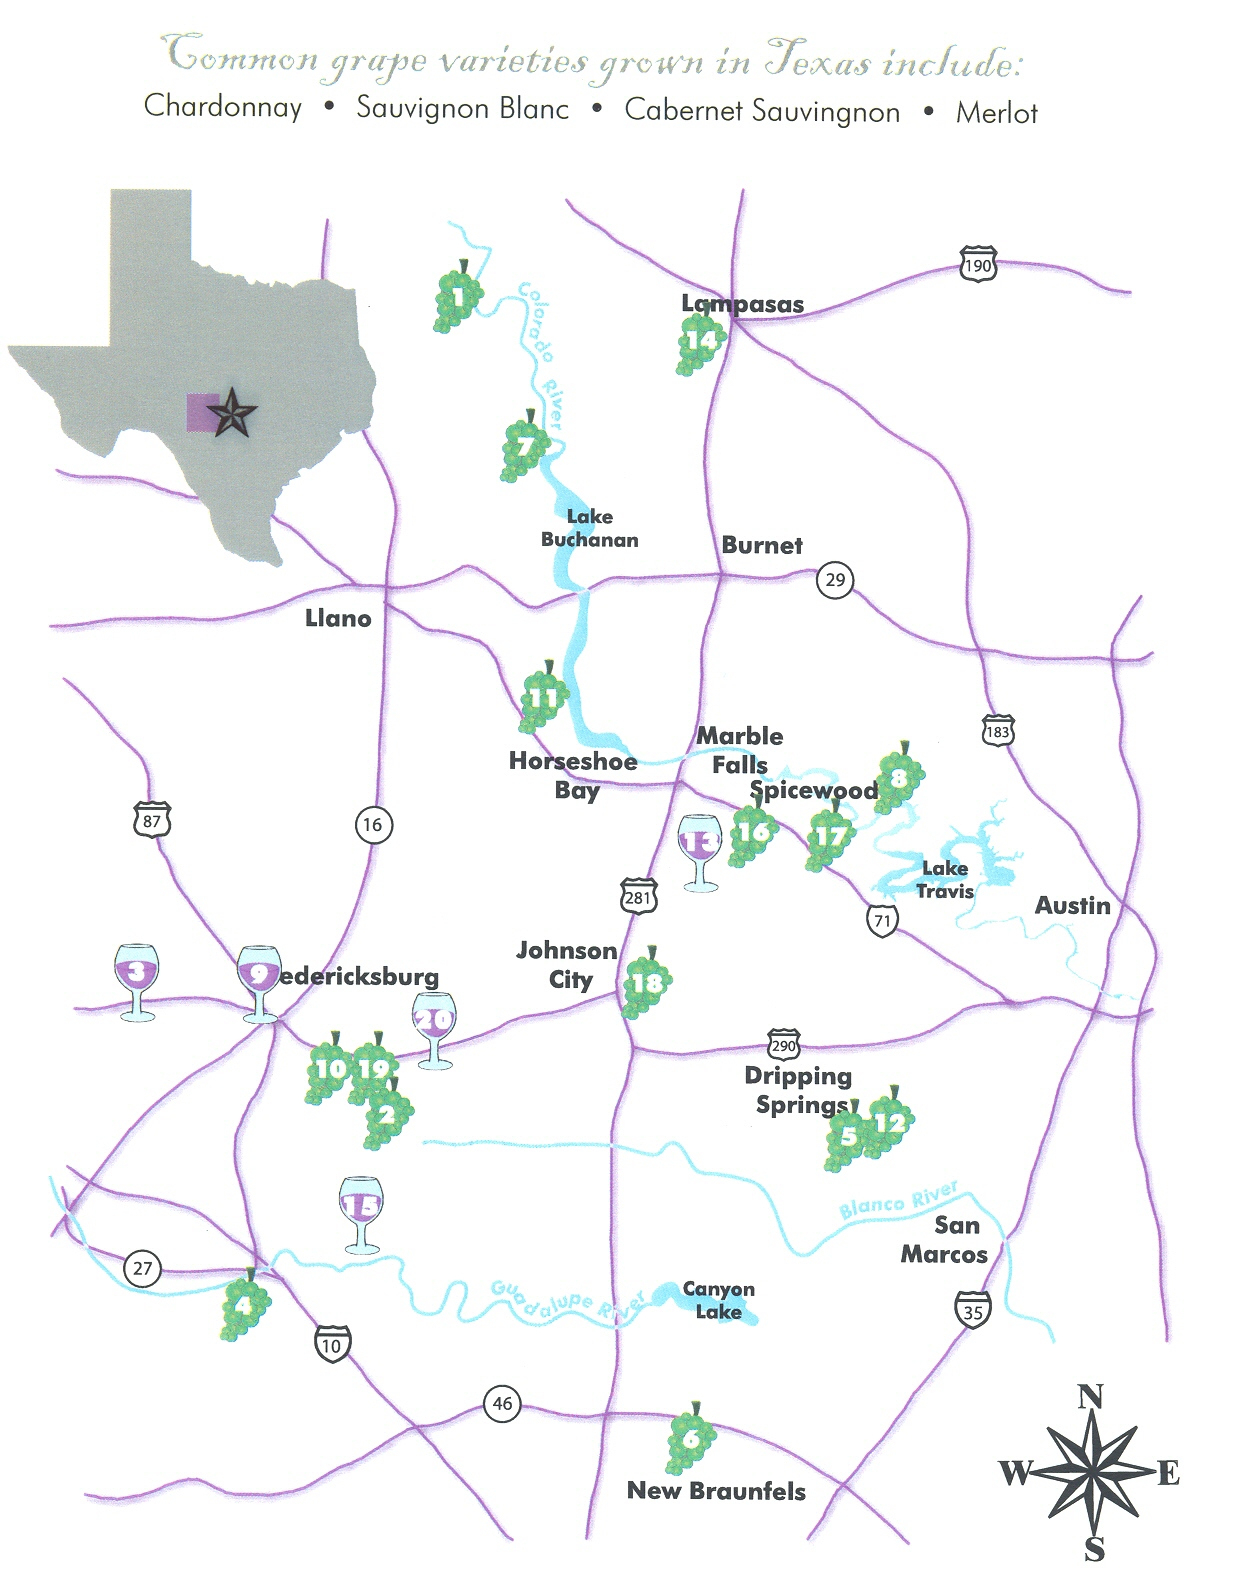 Texas Hill Country Vineyards &amp;amp; Wineries - Hill Country Texas Wineries Map